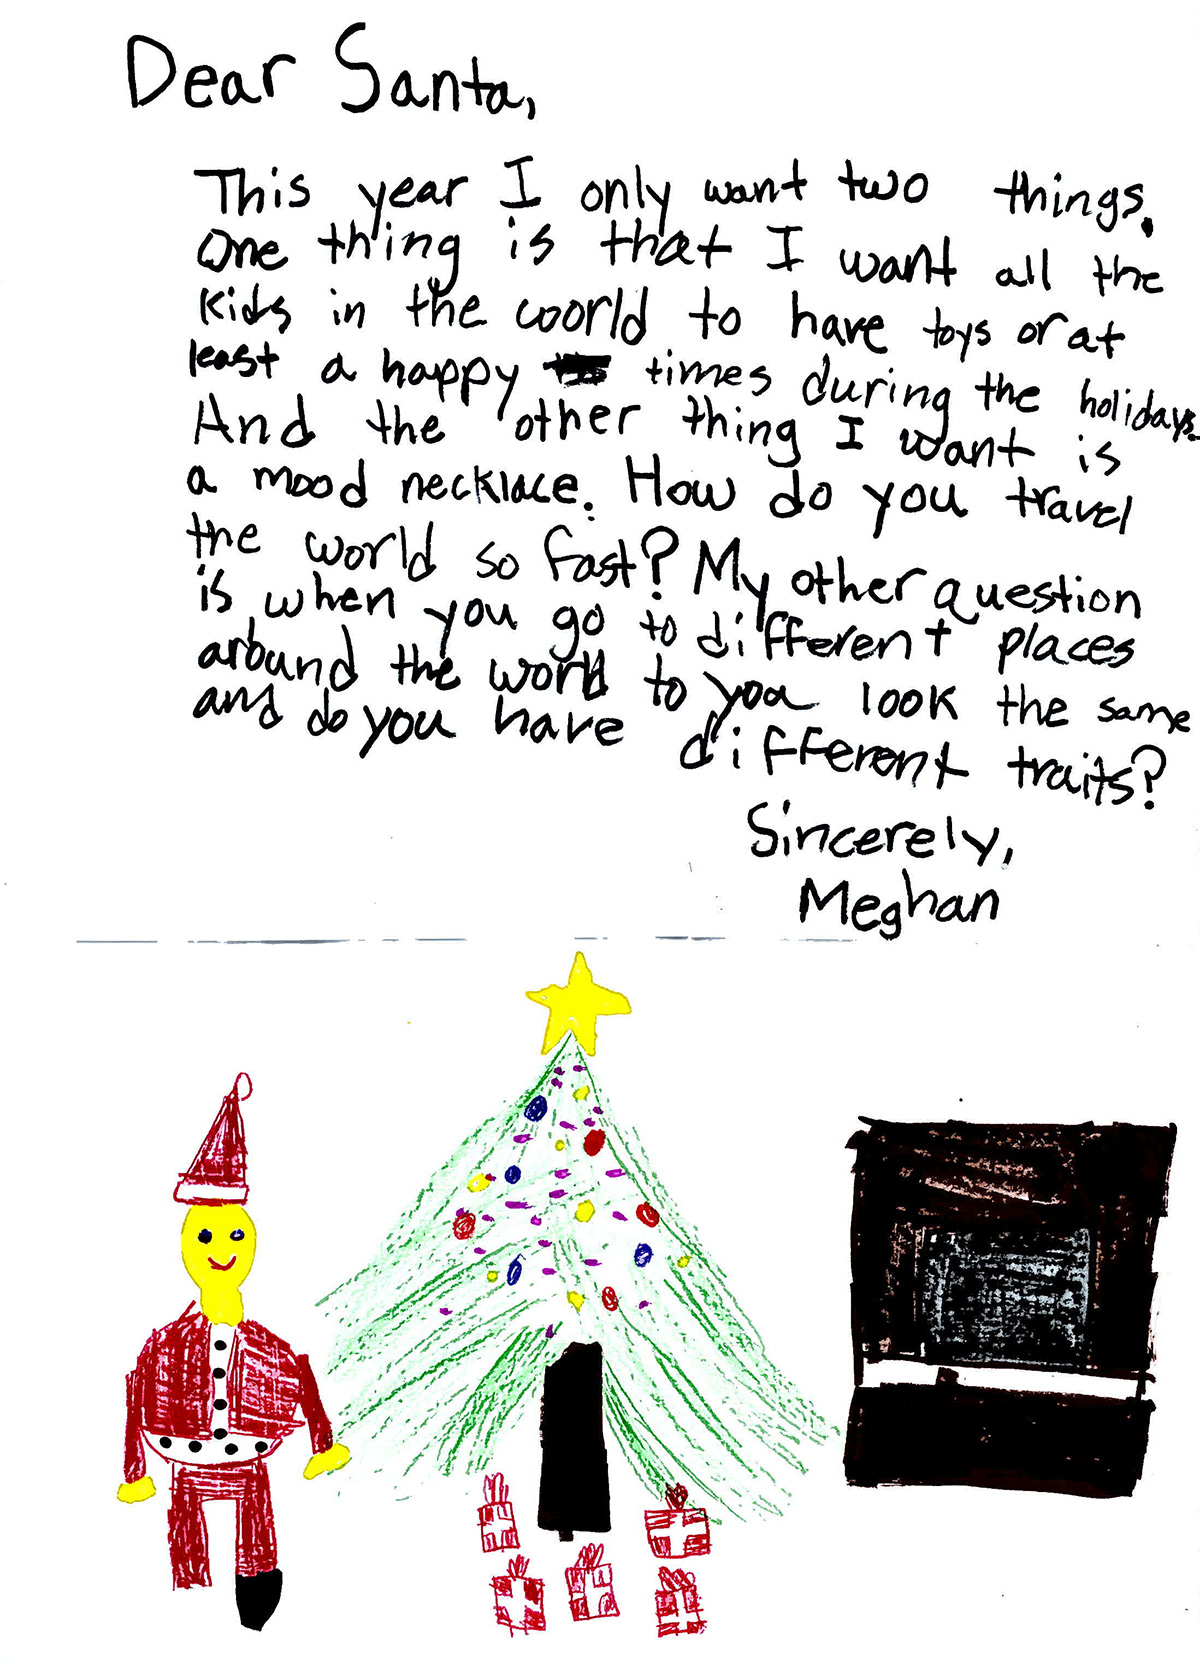 Letter to Santa with child’s drawing of Santa and a Christmas tree with gifts underneath.